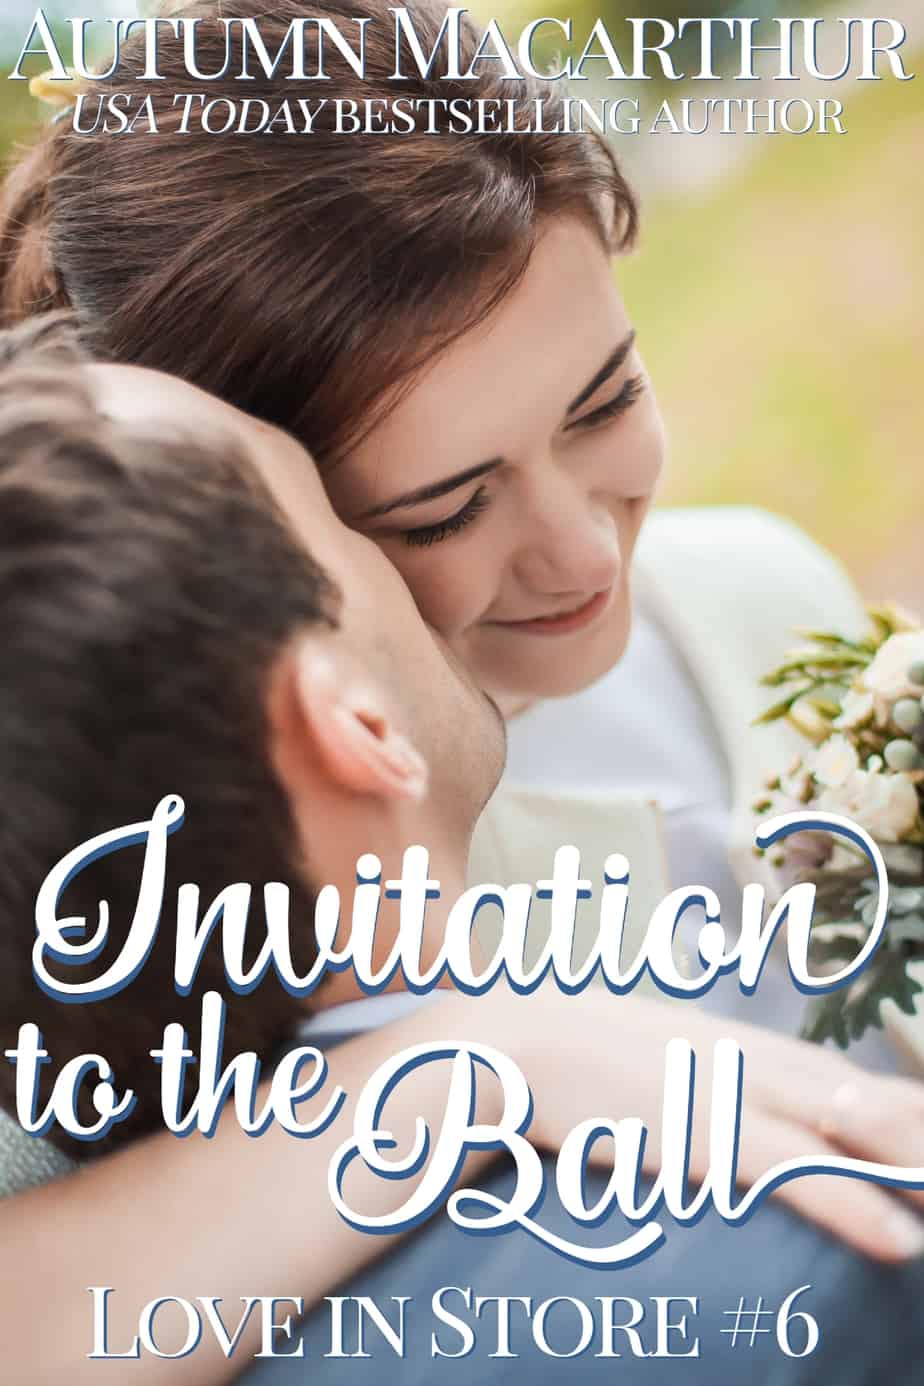 Cover for sweet Christian romance novella Invitation to the Ball, by Autumn Macarthur